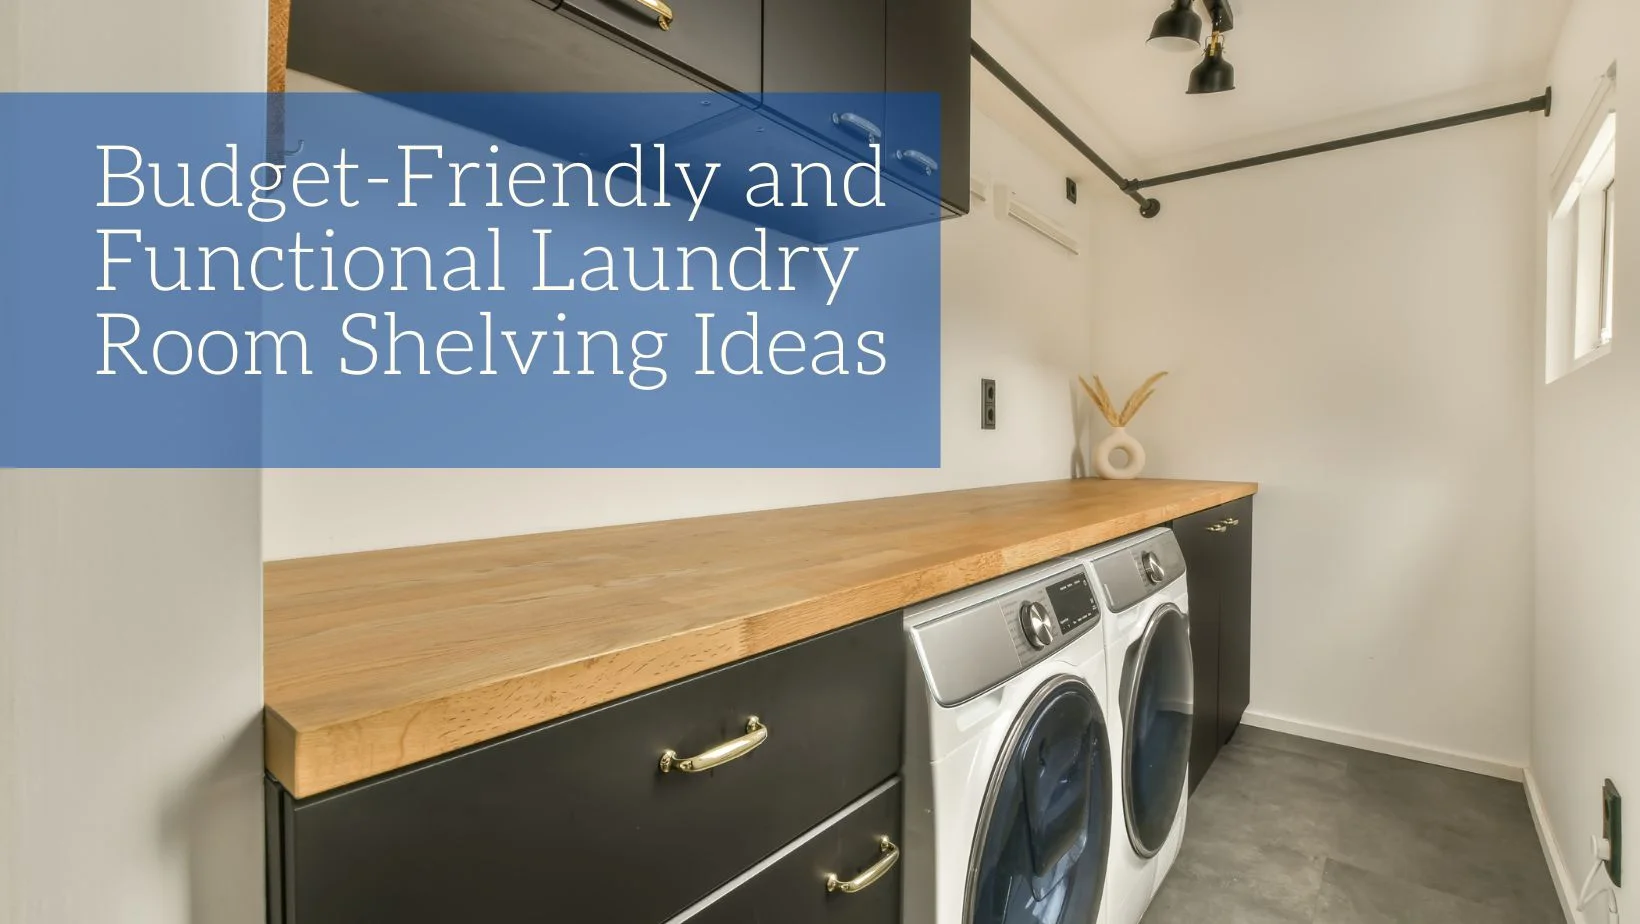 Budget-Friendly and Functional Laundry Room Shelving Ideas